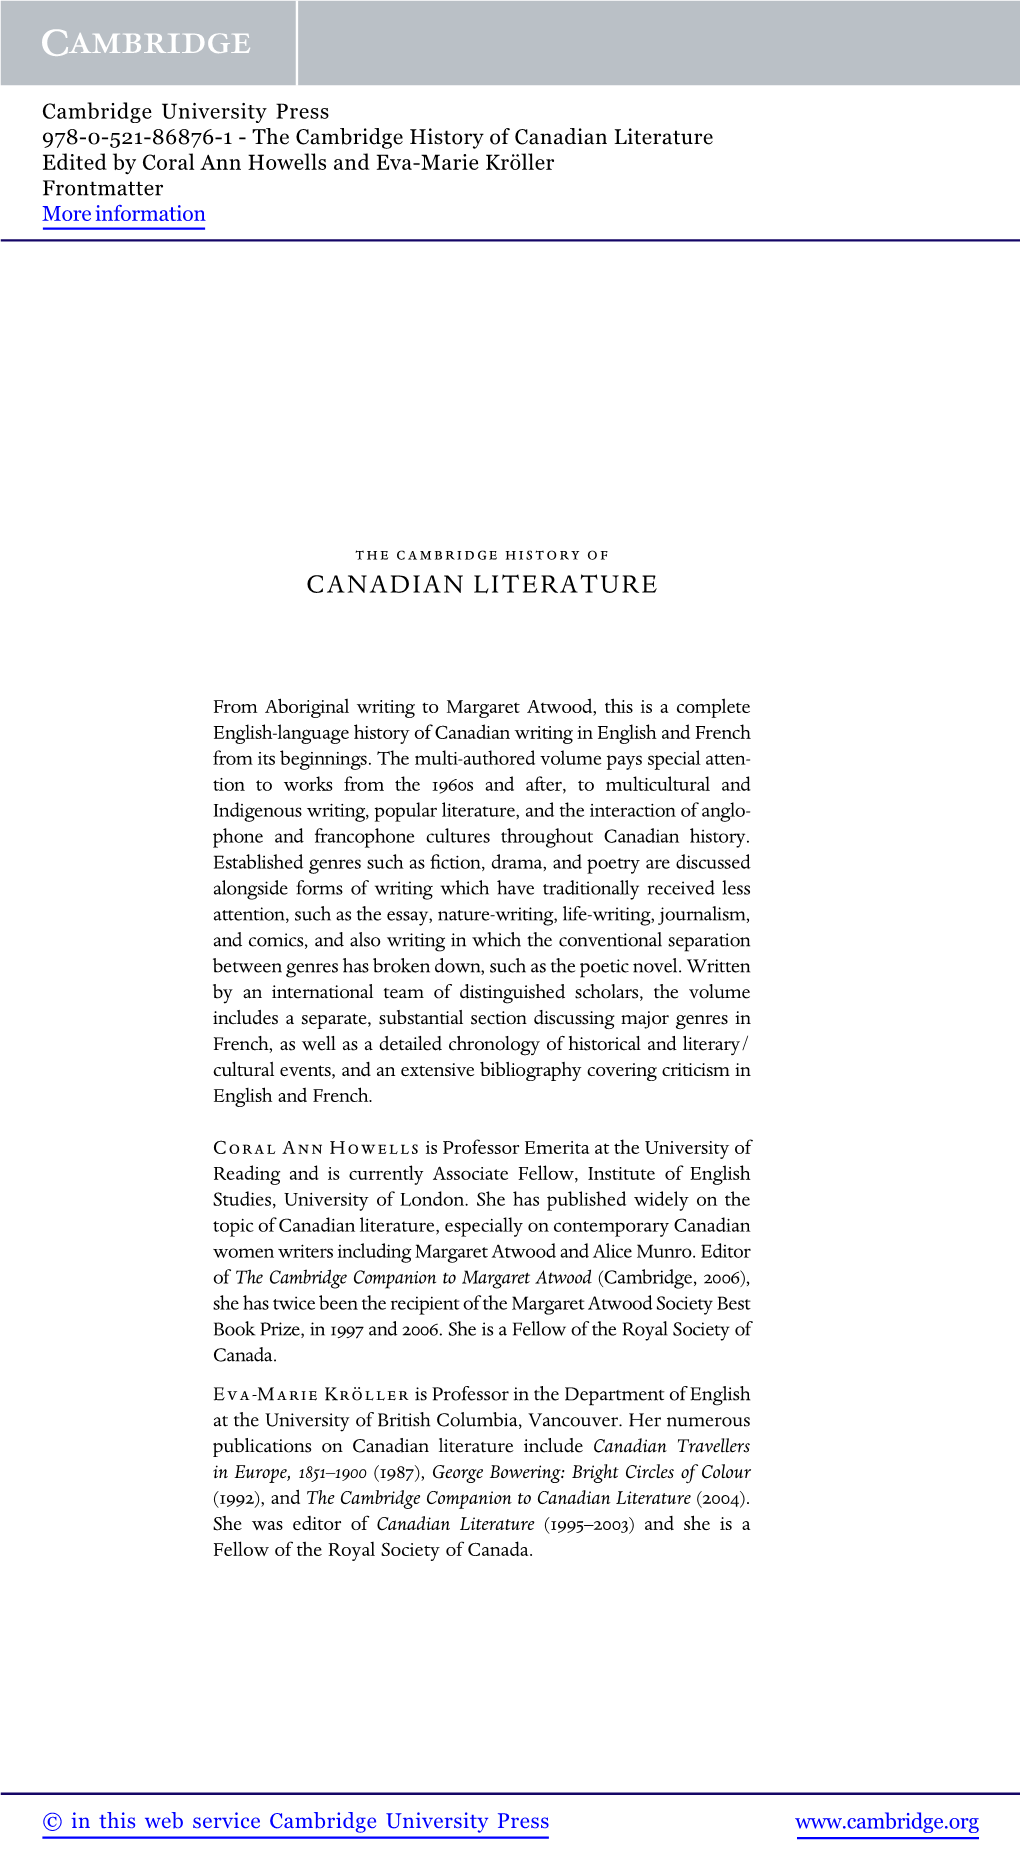 Canadian Literature Edited by Coral Ann Howells and Eva-Marie Kröller Frontmatter More Information